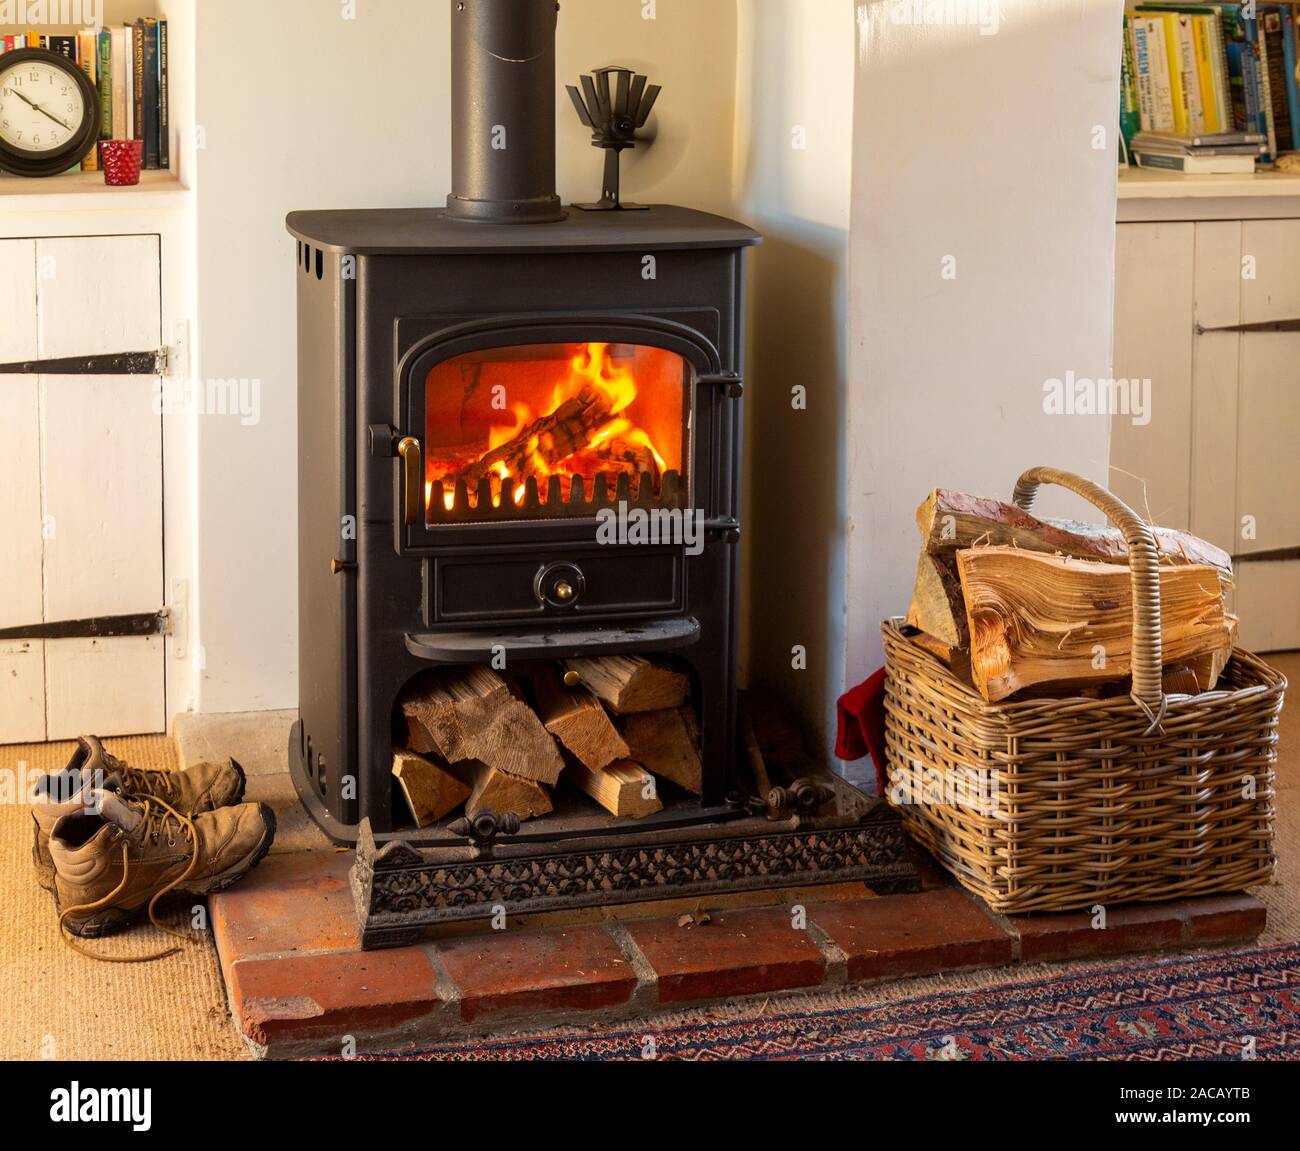 Roaring warm log fire Clearview multi fuel domestic stove burner in living room of home Stock Photo